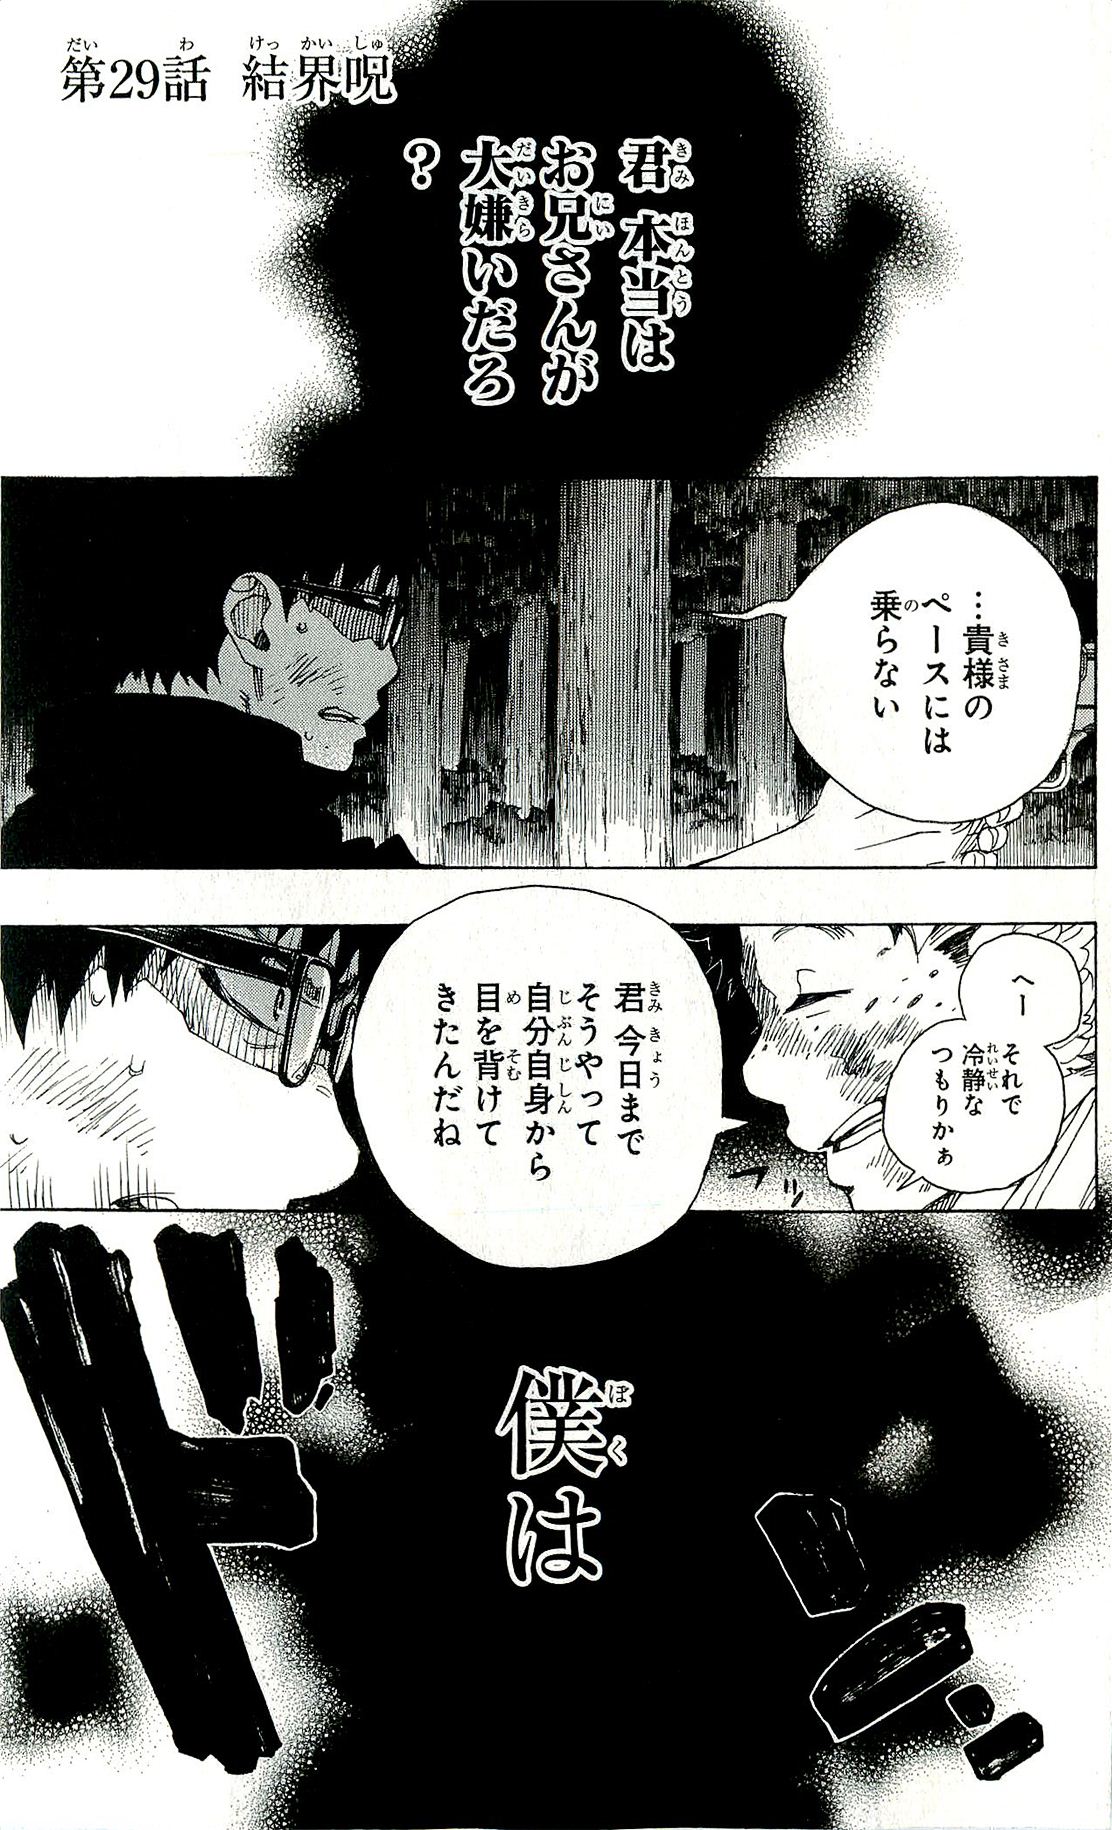 Ao no Exorcist - Chapter 29 - Page 1